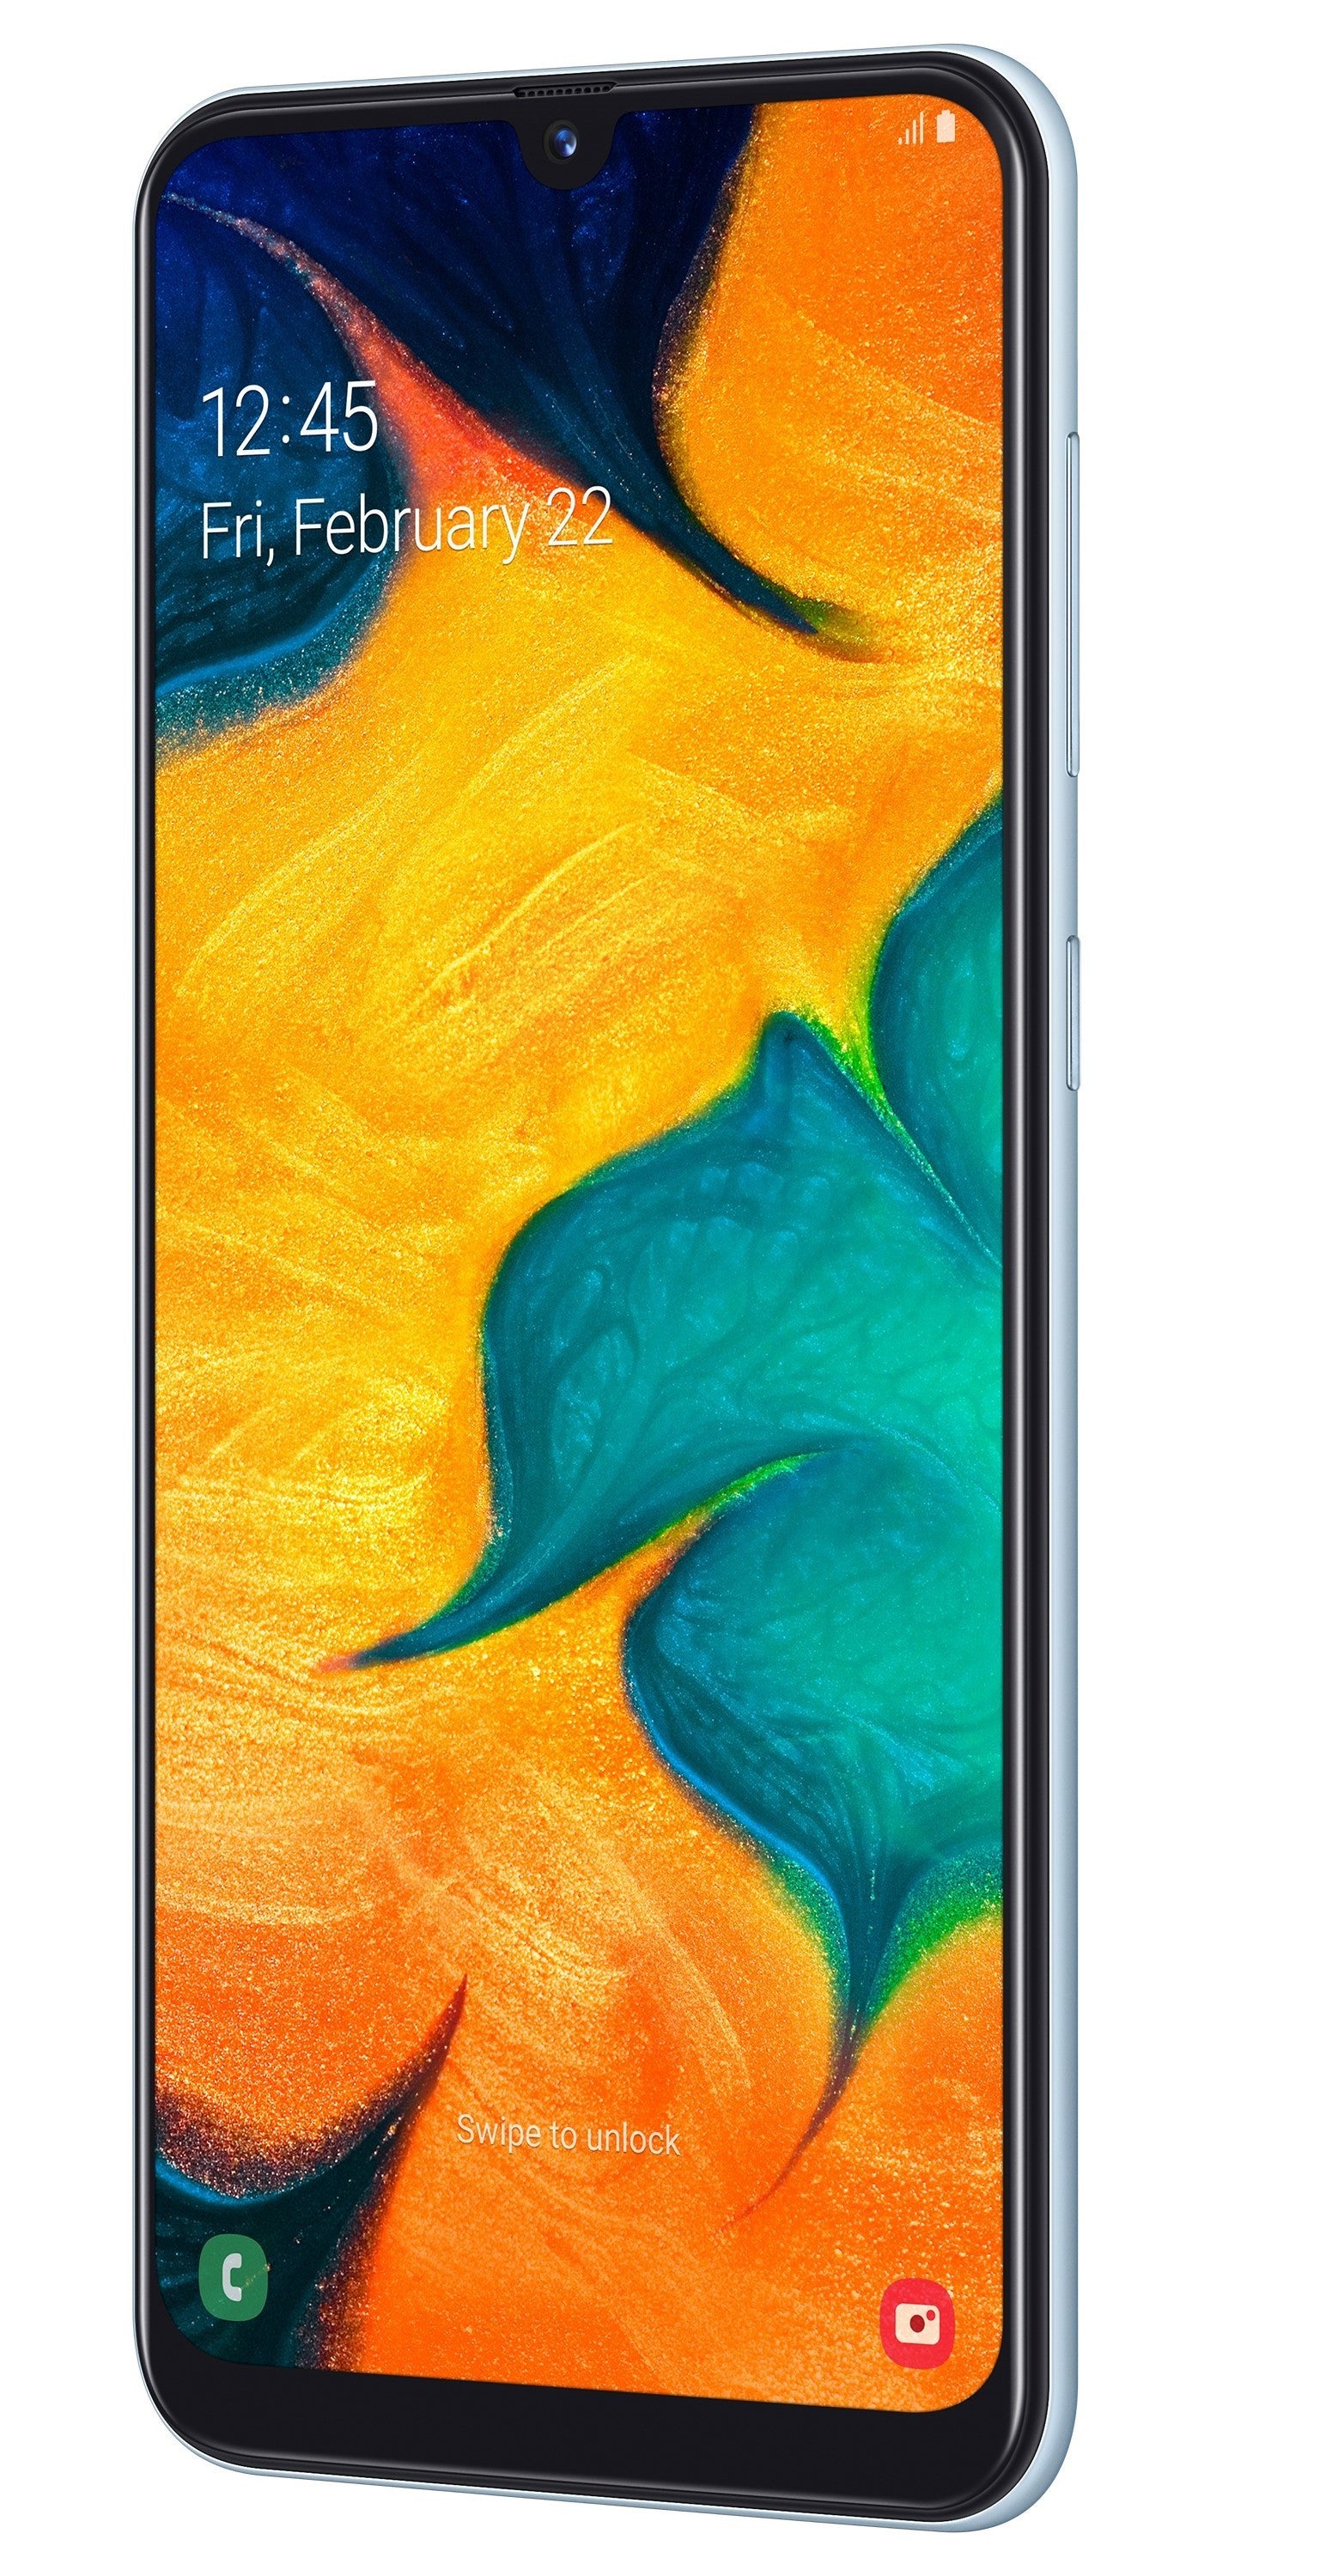 Samsung Galaxy A50 &amp; A30 debut with Infinity-U displays, ultra-wide cameras